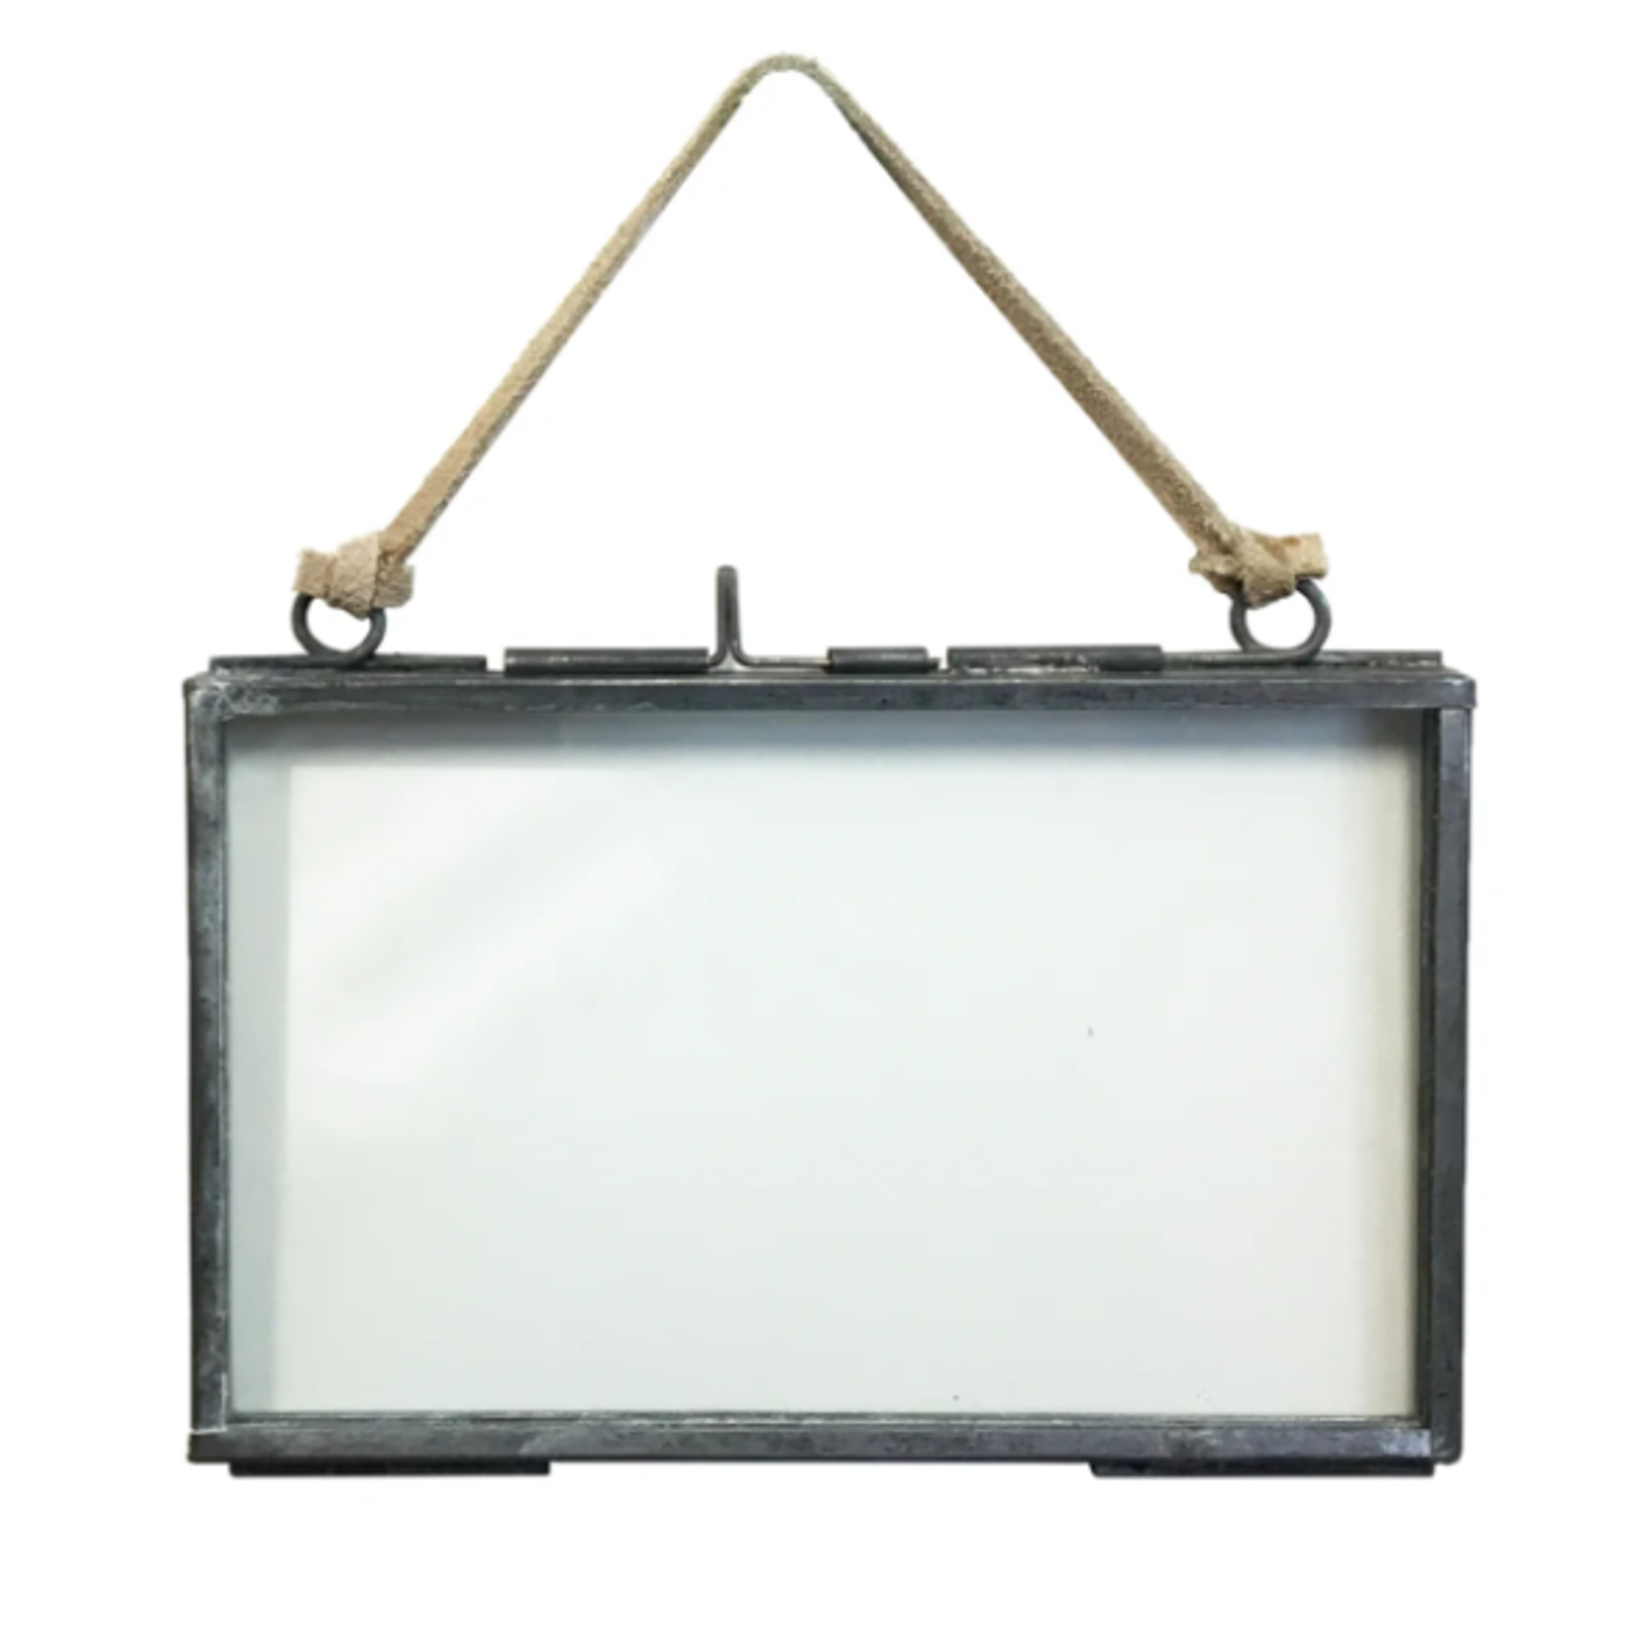 Sugarboo & Co. Sugarboo AC178  Zinc Horizontal Picture Frame with Stand  5"x3"